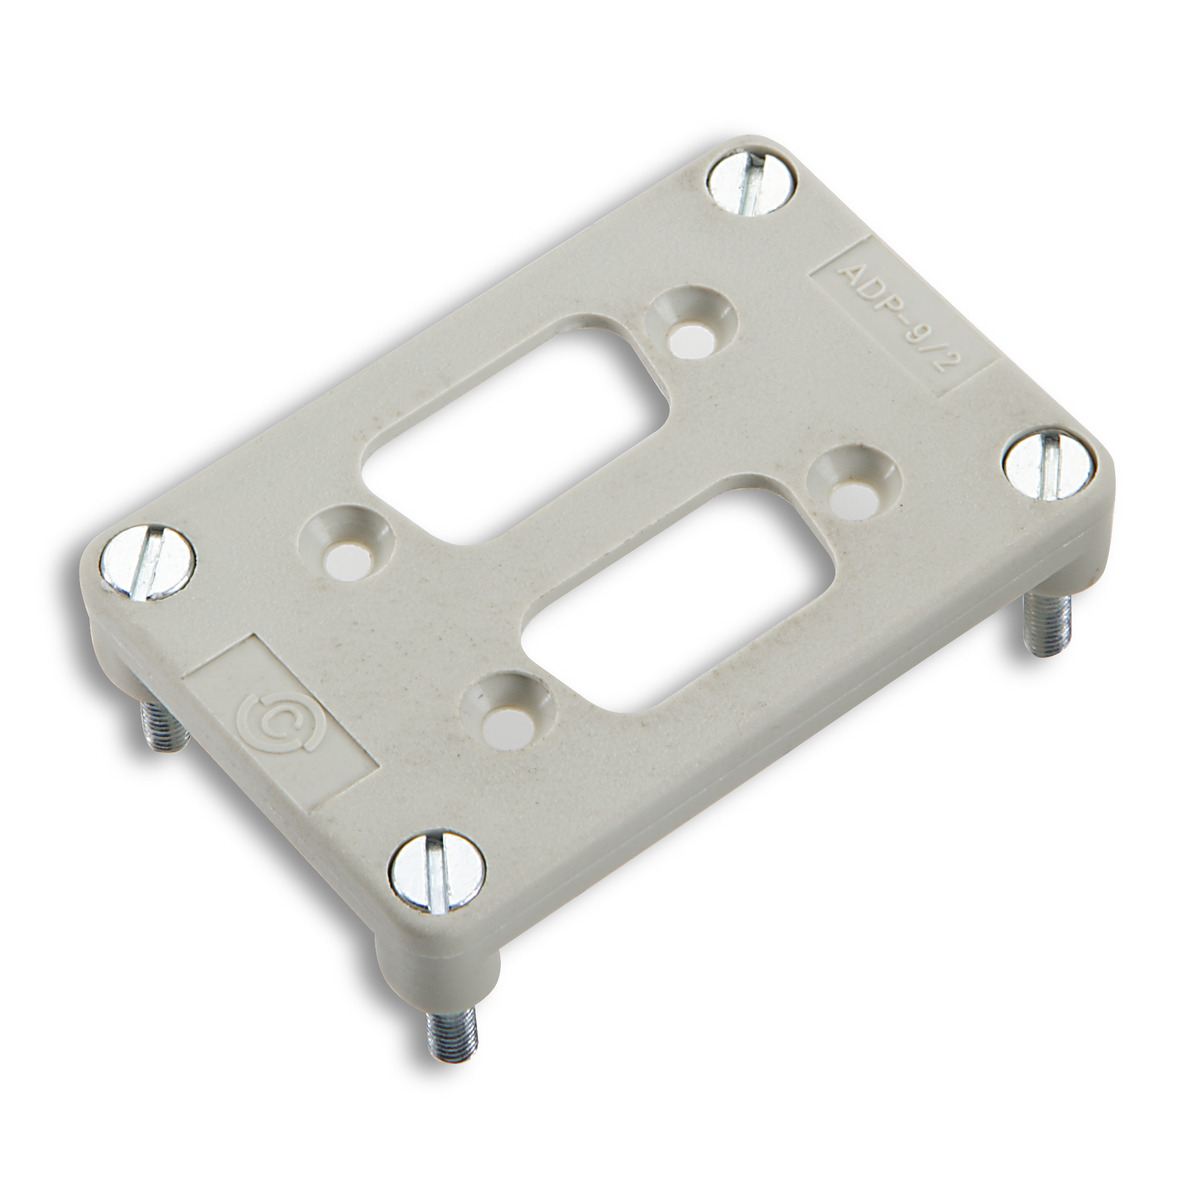 EPIC® Adapter plates for 2 D-Sub inserts Adapterplatte